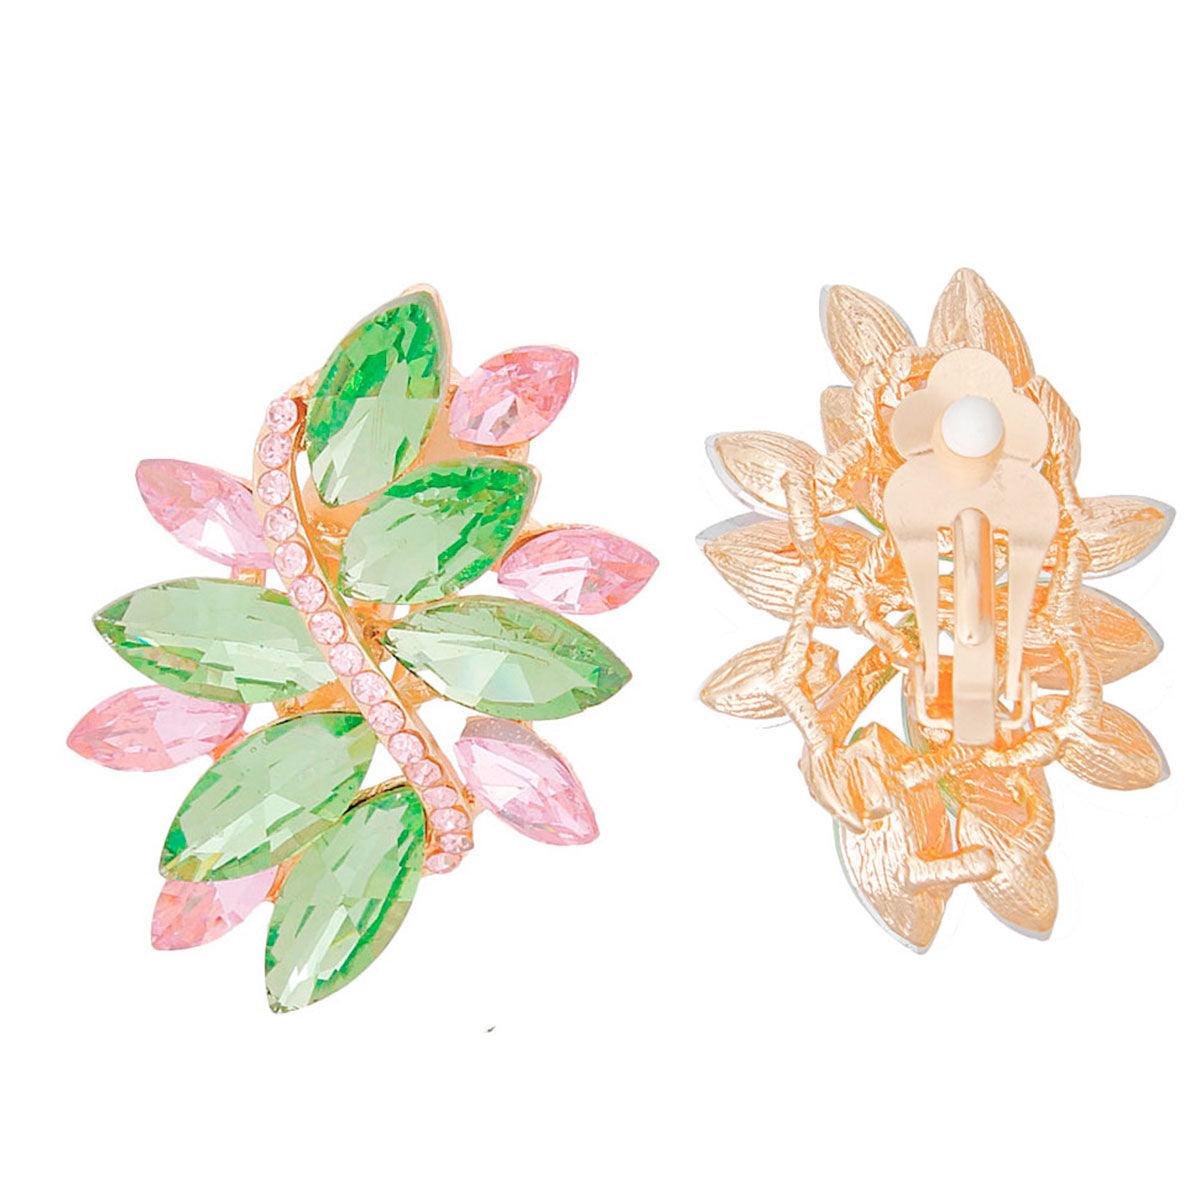 Marquise Studs: Fashionable Soft Pink-Green Earrings for Elegant Style